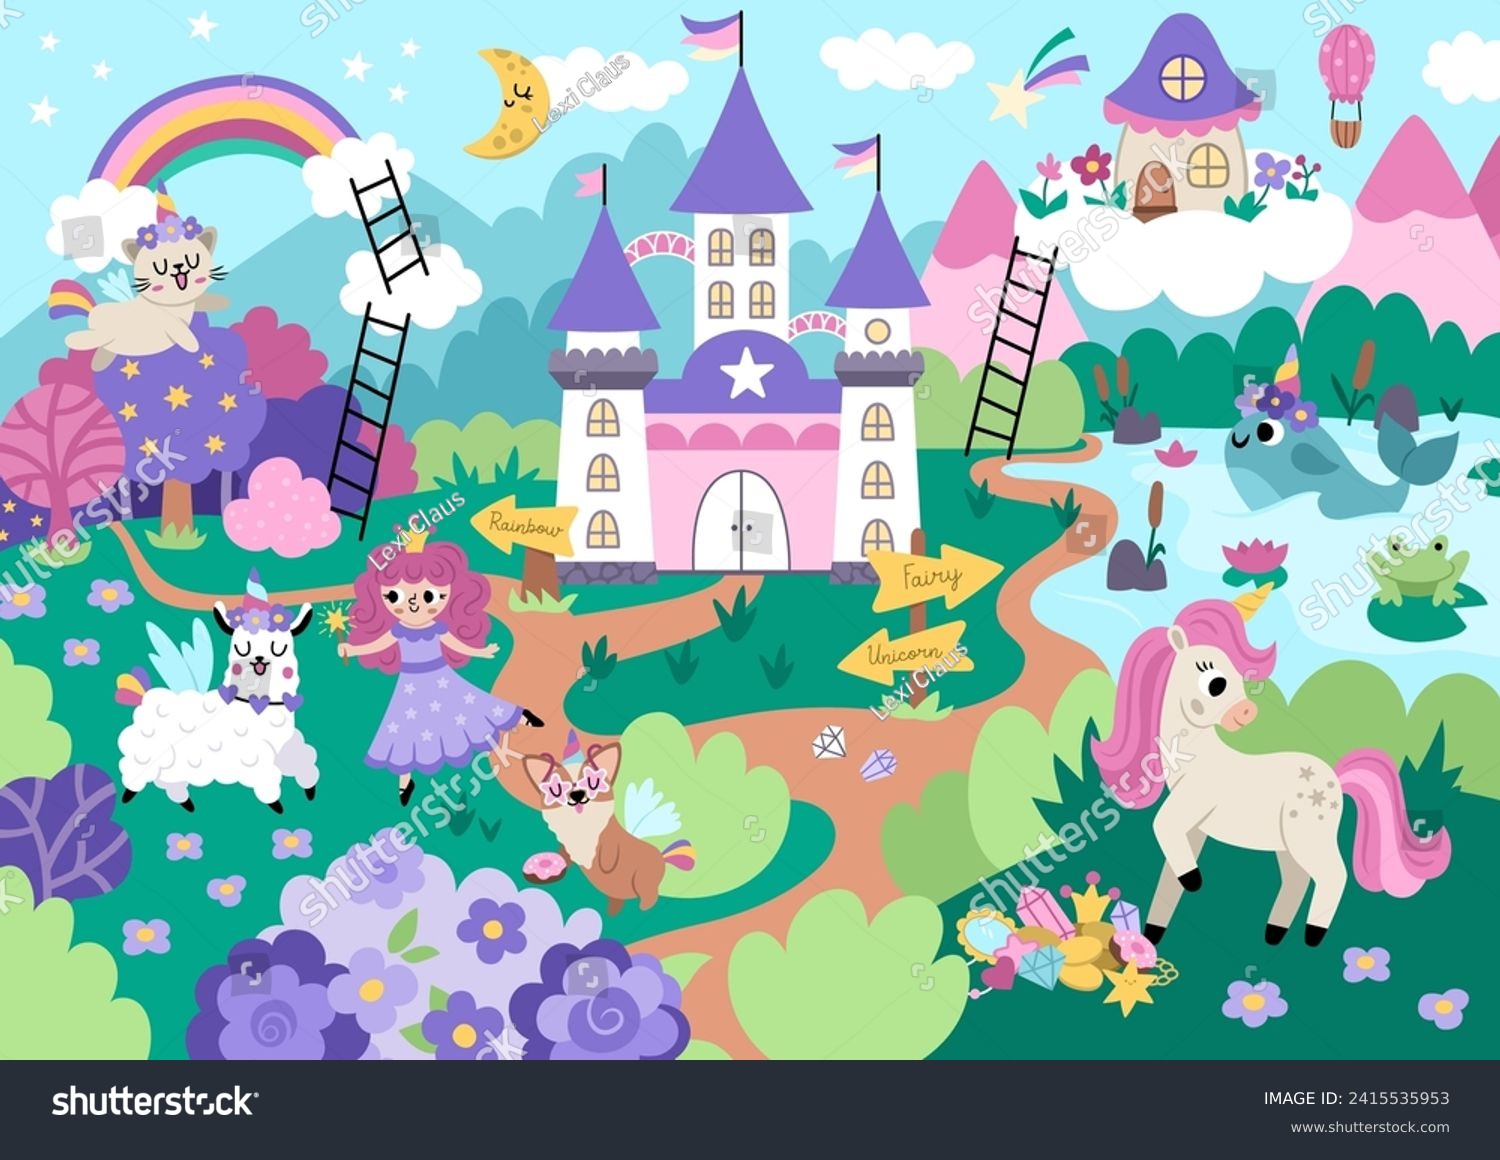 SVG of Vector unicorn themed landscape illustration. Fairytale scene with characters, castle, rainbow, forest. Magic nature background with fairy, animals with horns. Fantasy world picture for kids
 svg